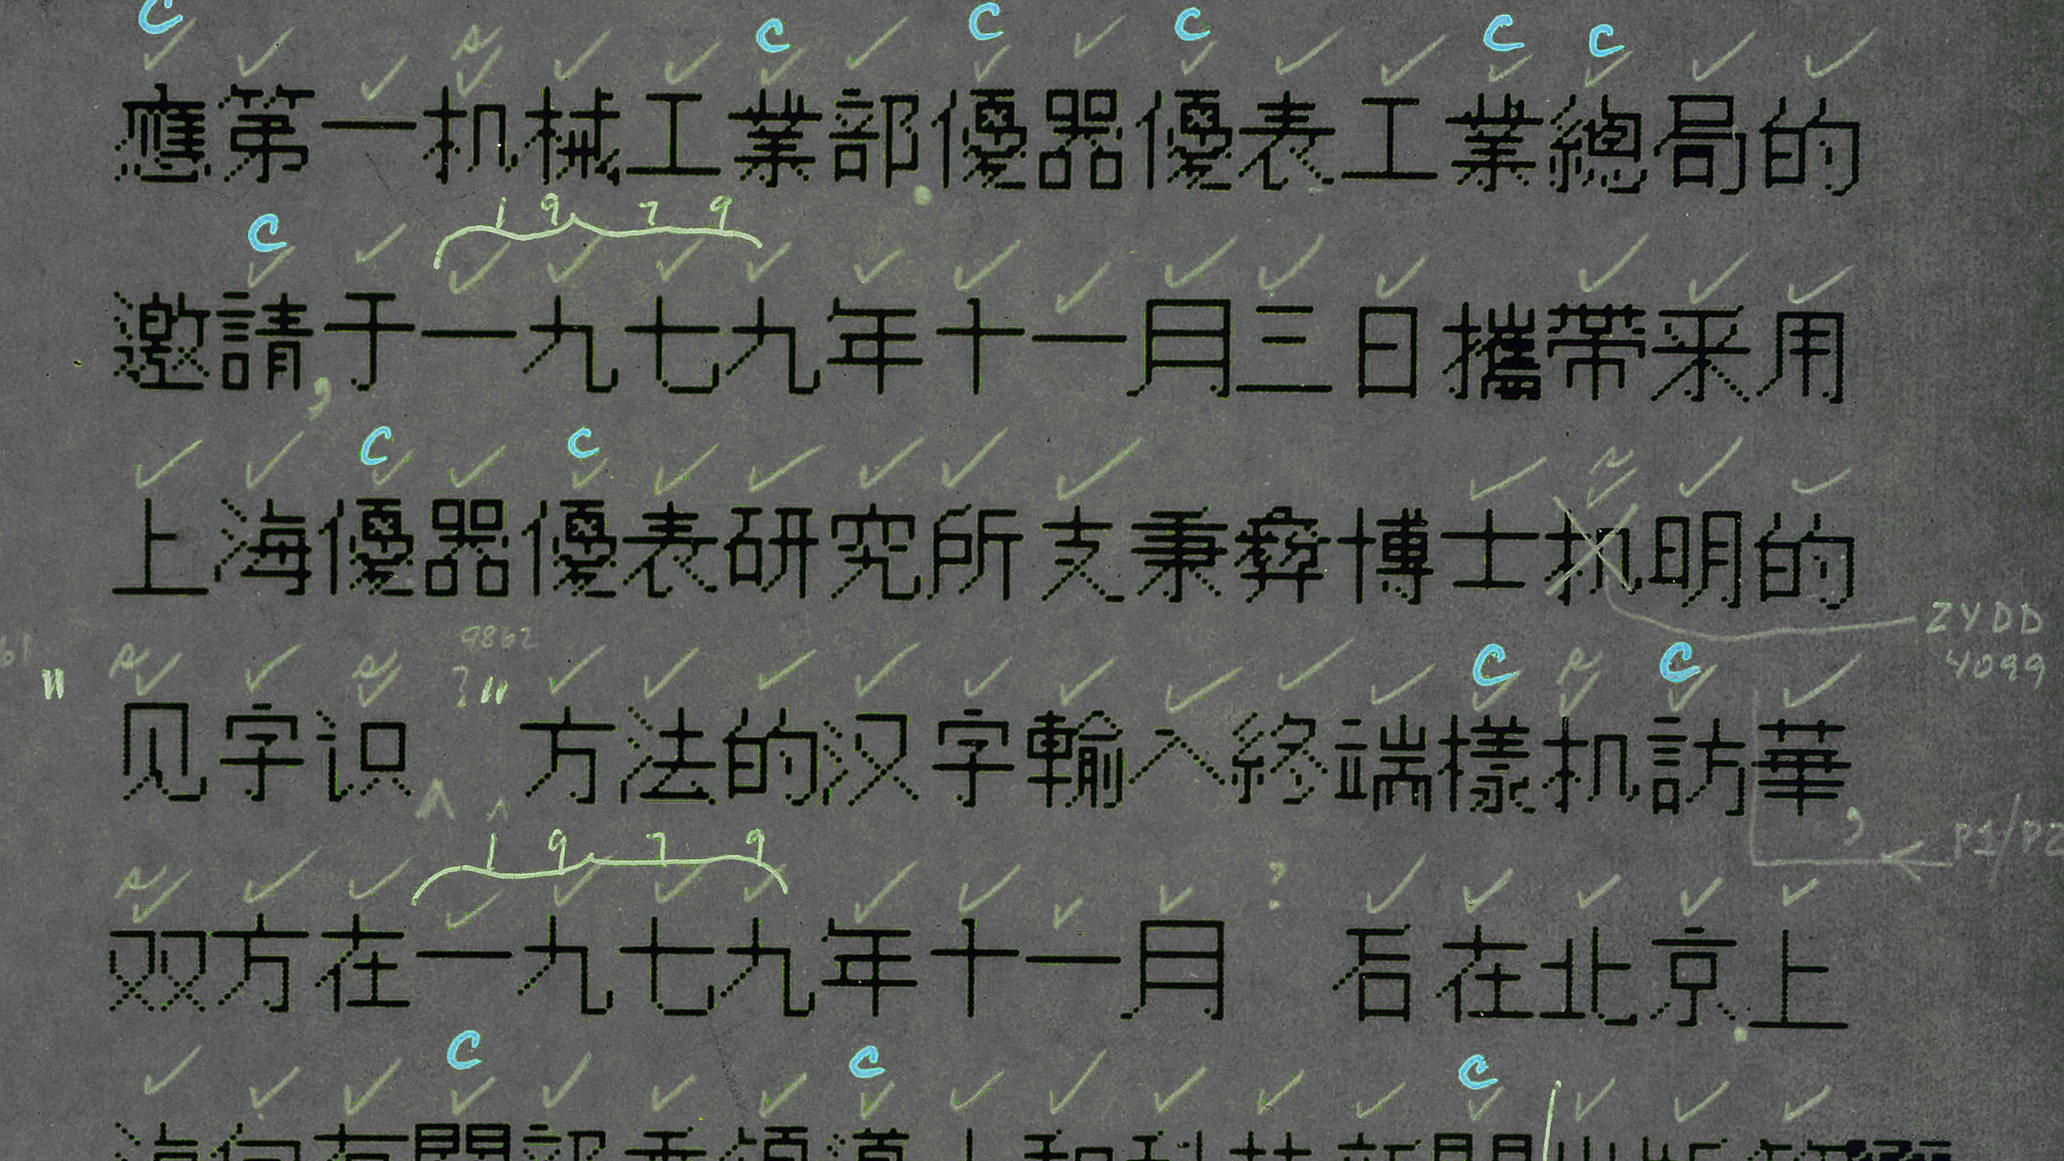 An early mock-up of a Chinese bitmap font made by the Graphic Arts Research Foundation (GARF).